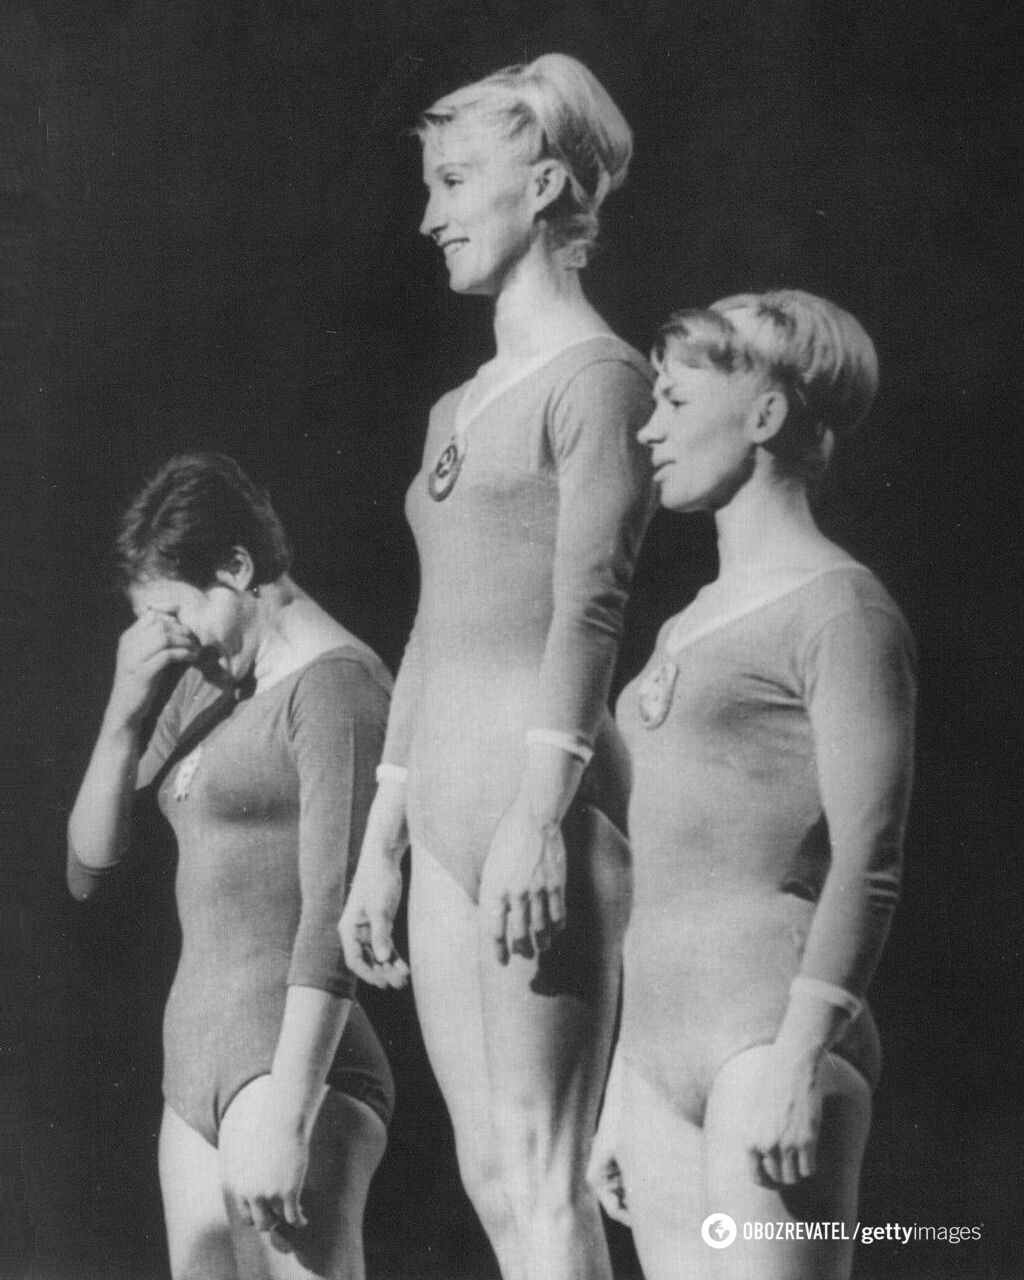 The most beautiful gymnasts of the USSR from the 60s: Brezhnev kissed the Ukrainian Madonna, and Castro invited her to the Miss Cuba contest